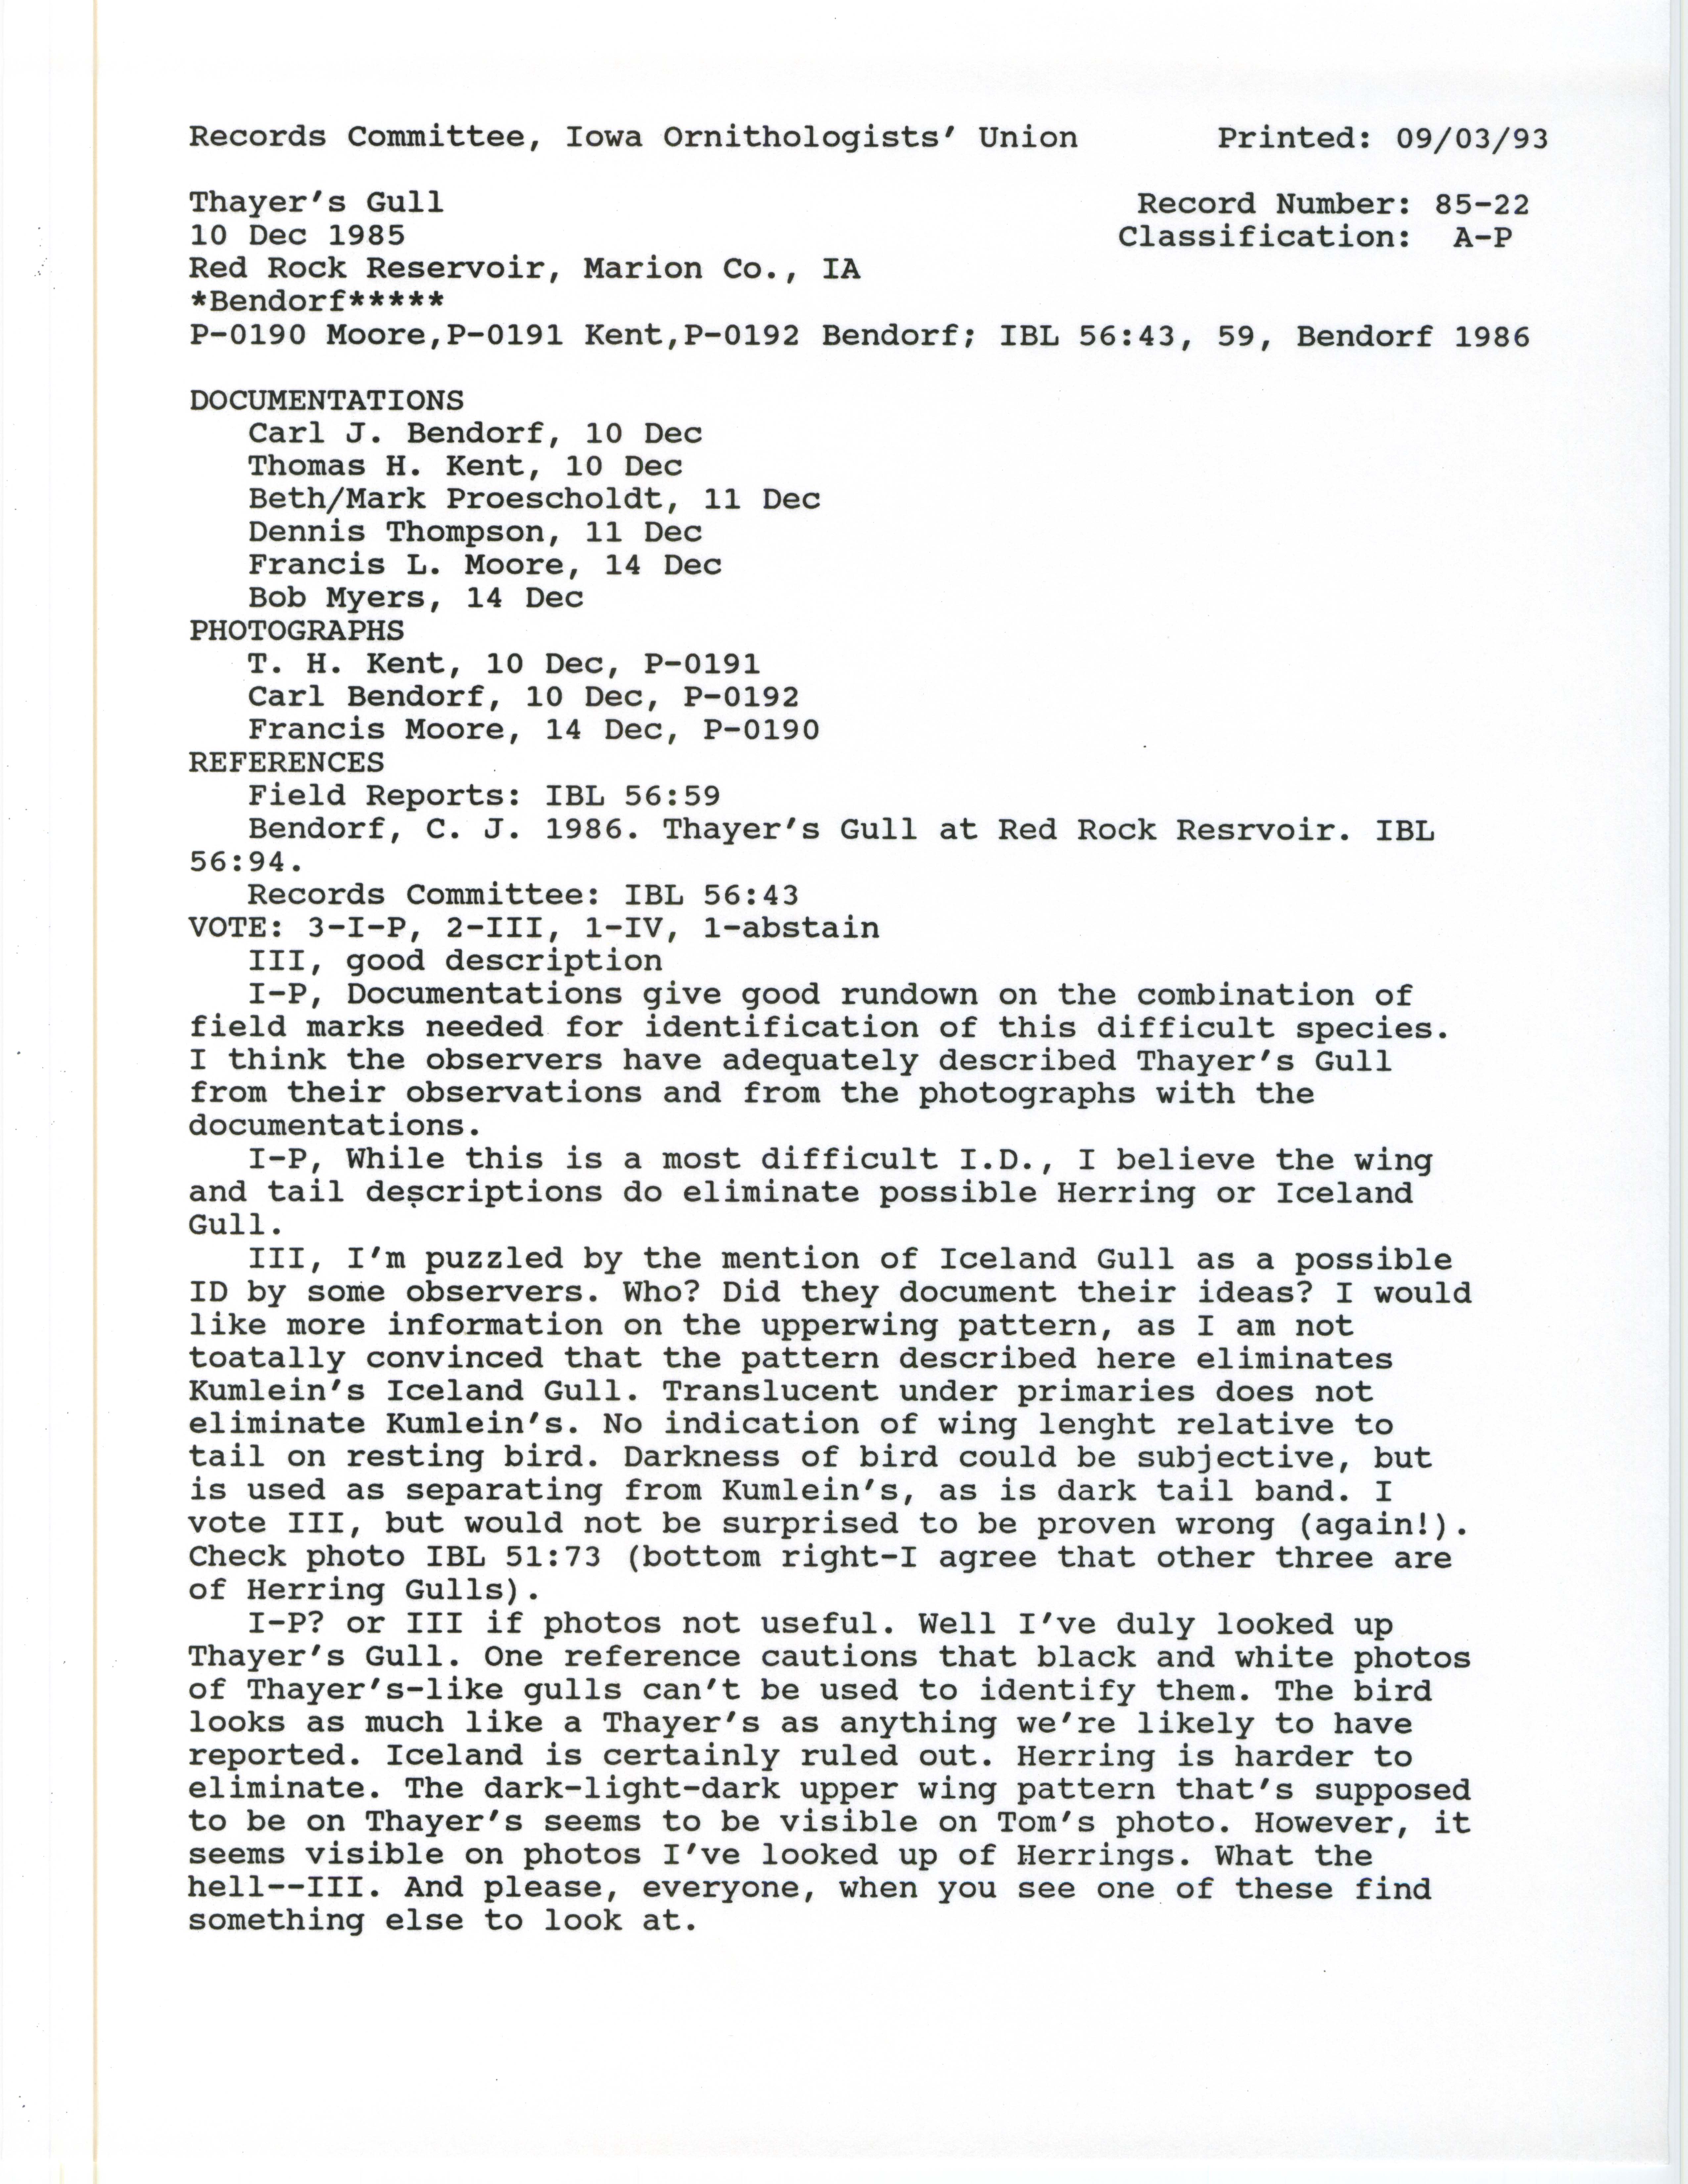 Records Committee review for rare bird sighting of a Thayer's Gull at Red Rock Reservoir Dam, 1985